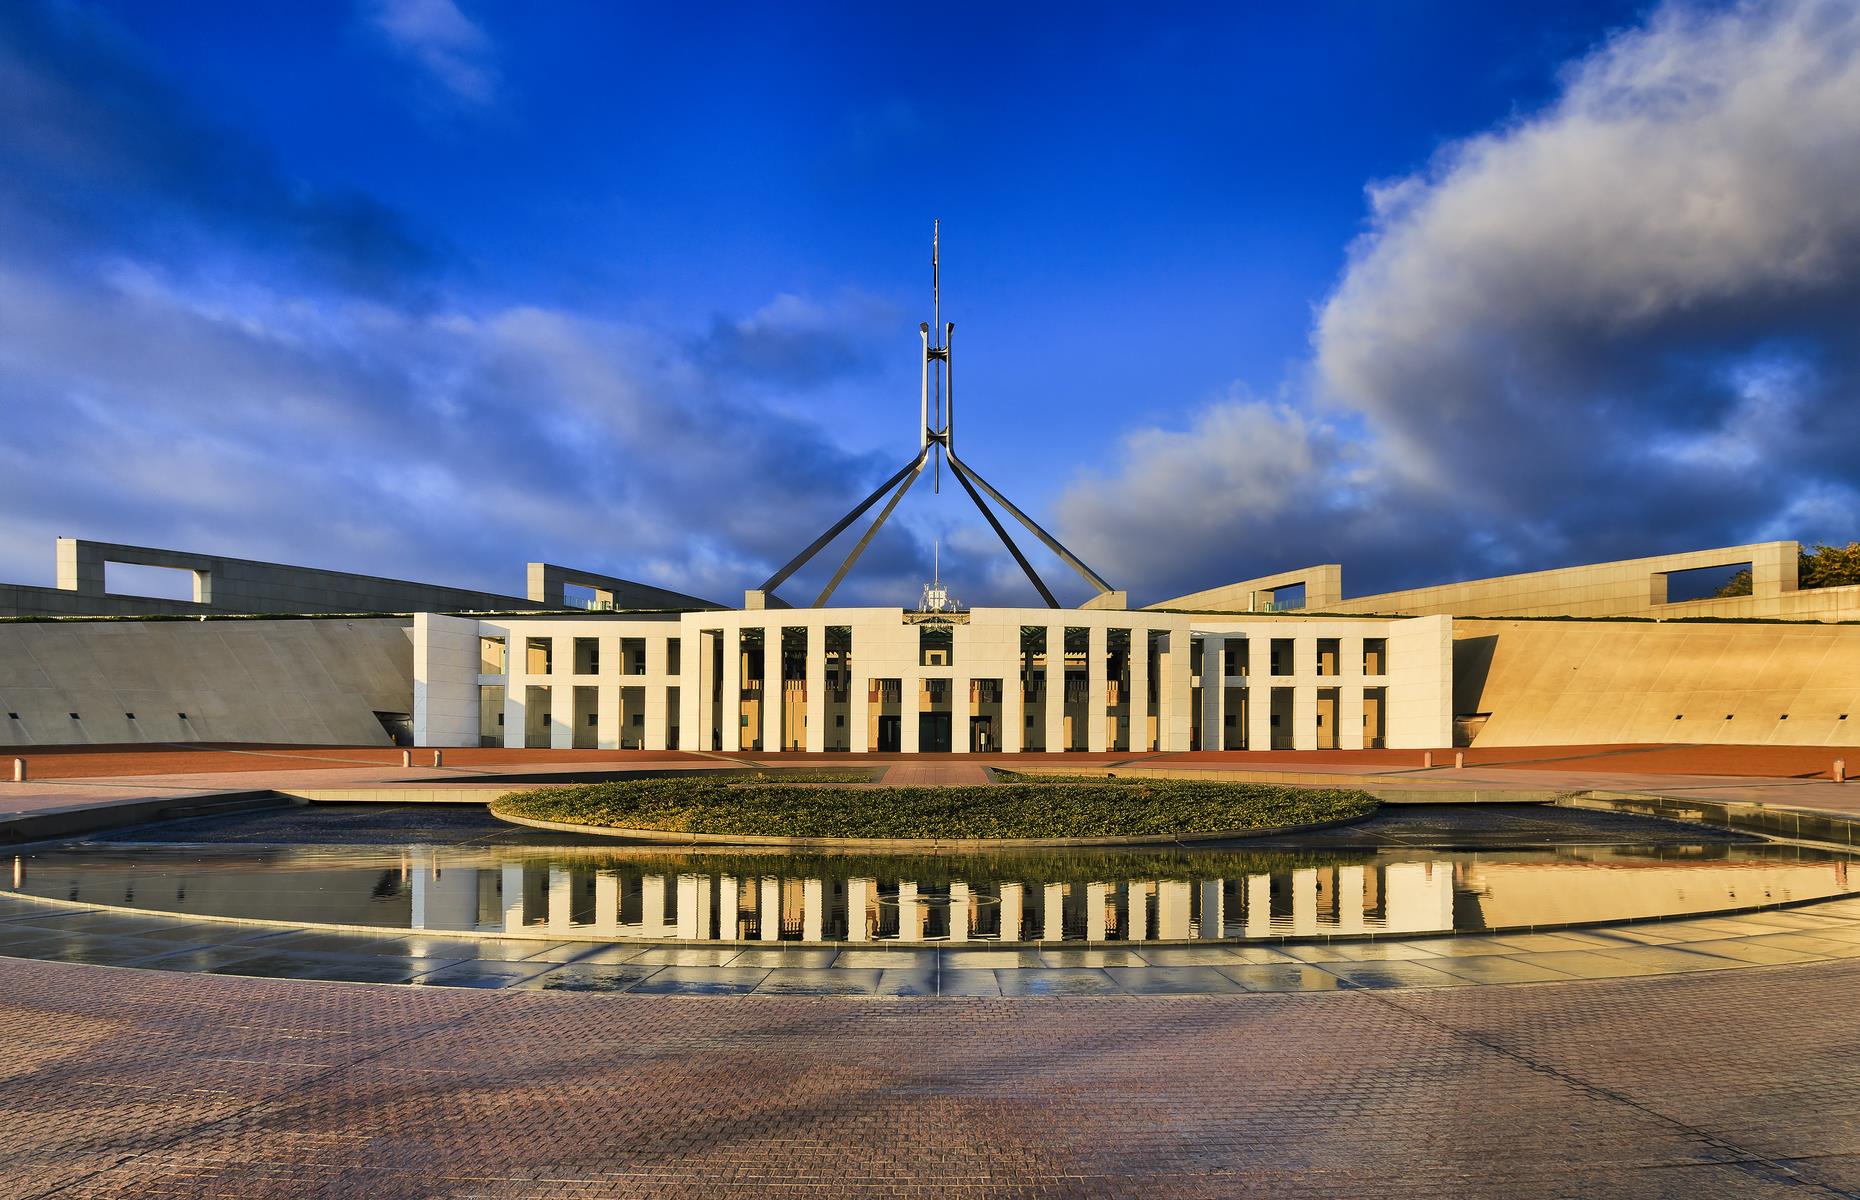 <p>As the capital, Canberra has the country's top cultural, historic and arts institutions. Best of all, most of them are free to enter. Musts on any museum-hopping weekend here are Parliament House, Australian War Memorial, The National Museum of Australia, National Gallery of Australia and The Royal Australian Mint. Time your visit for September when Canberra is a riot of spring colour during the annual <a href="https://floriadeaustralia.com/">Floriade</a><a href="http://floriadeaustralia.com/"> Festival</a>, the largest (and free) flower festival in the Southern Hemisphere. </p>